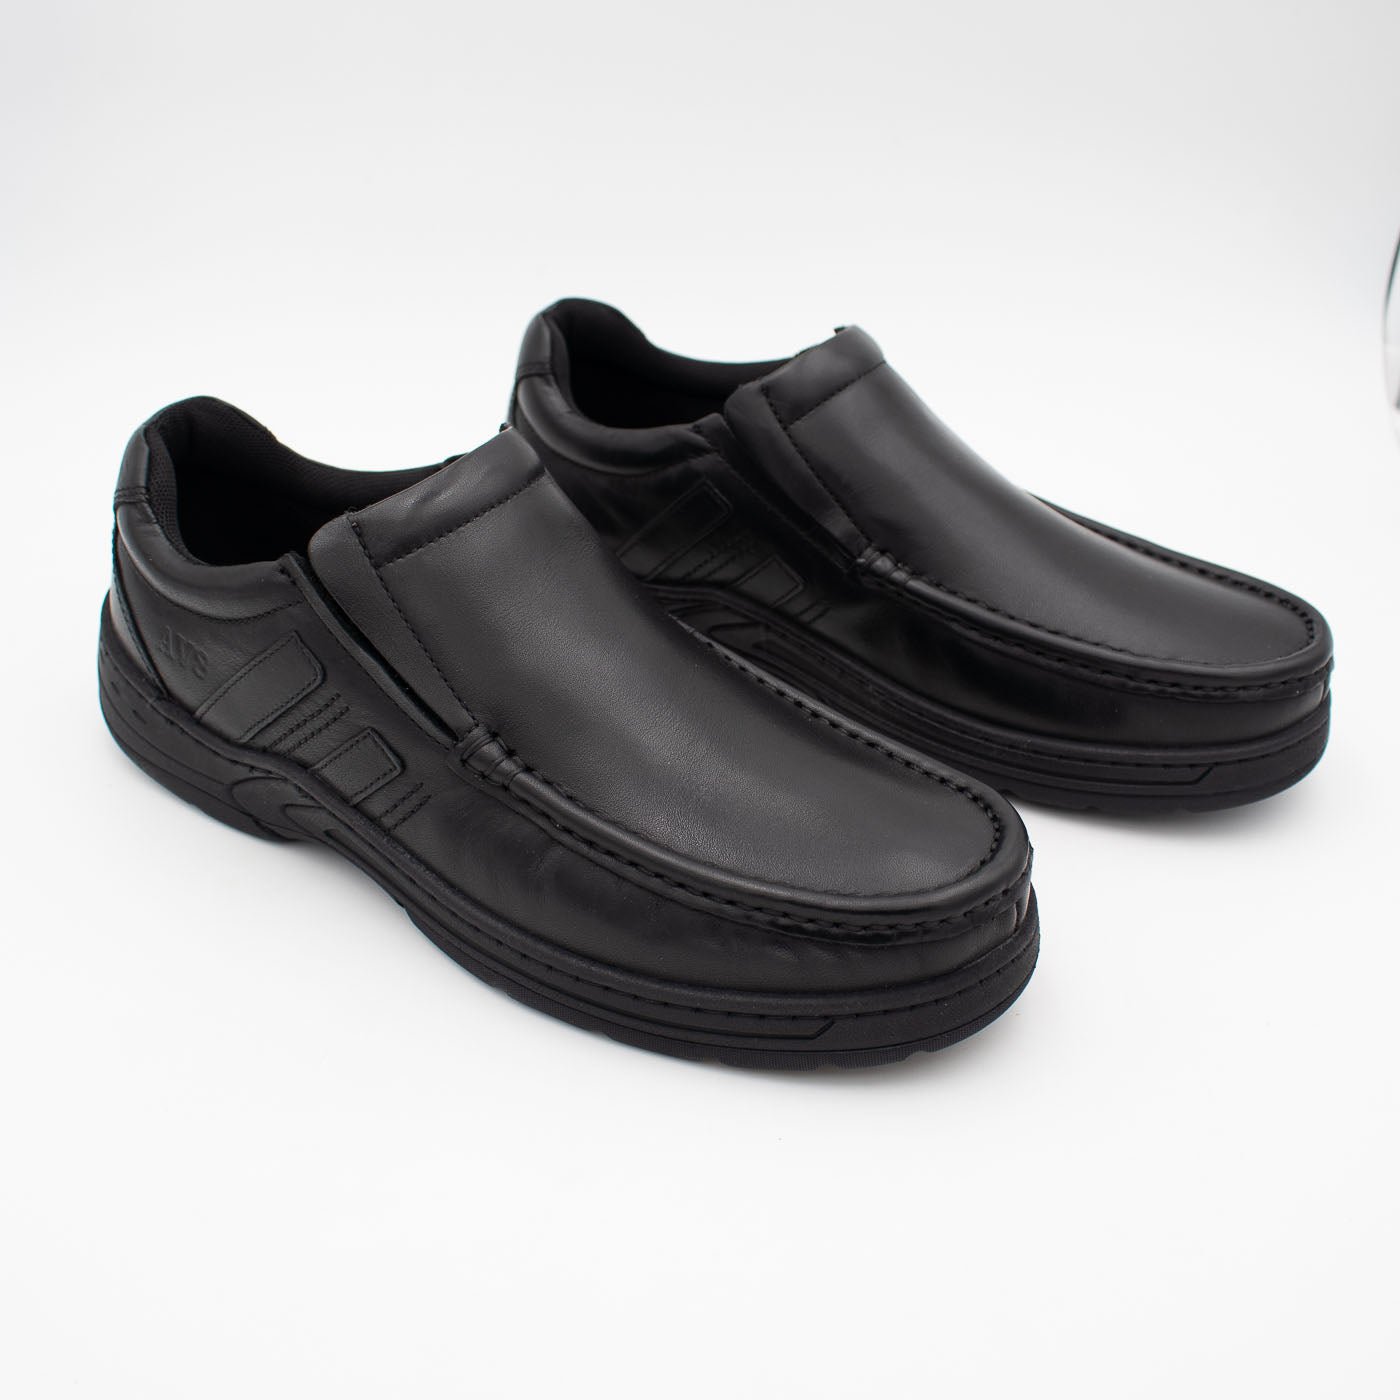 AV8 Kalvin Leather Slip-Ons displayed at a dynamic angle.